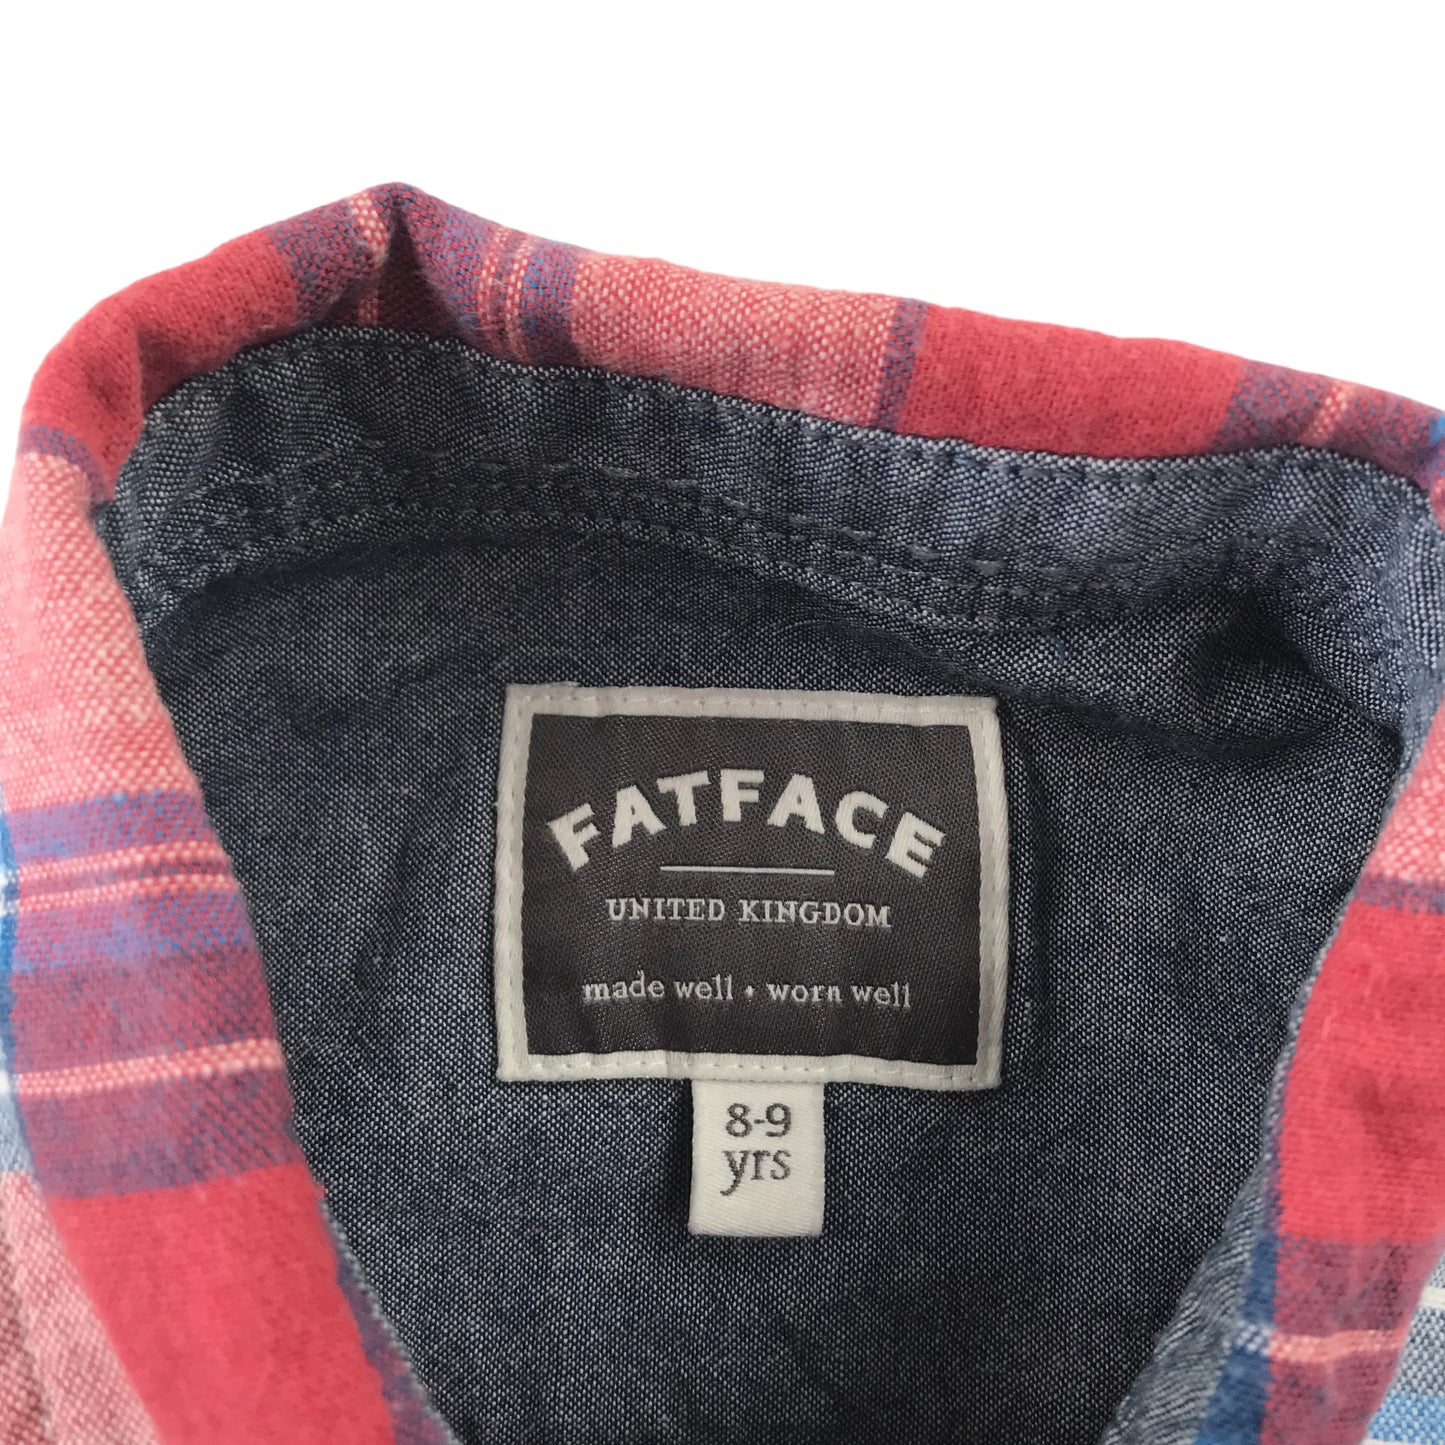 Fatface Shirt Age 8 Red White Blue Checked Pattern Short Sleeve Button Up